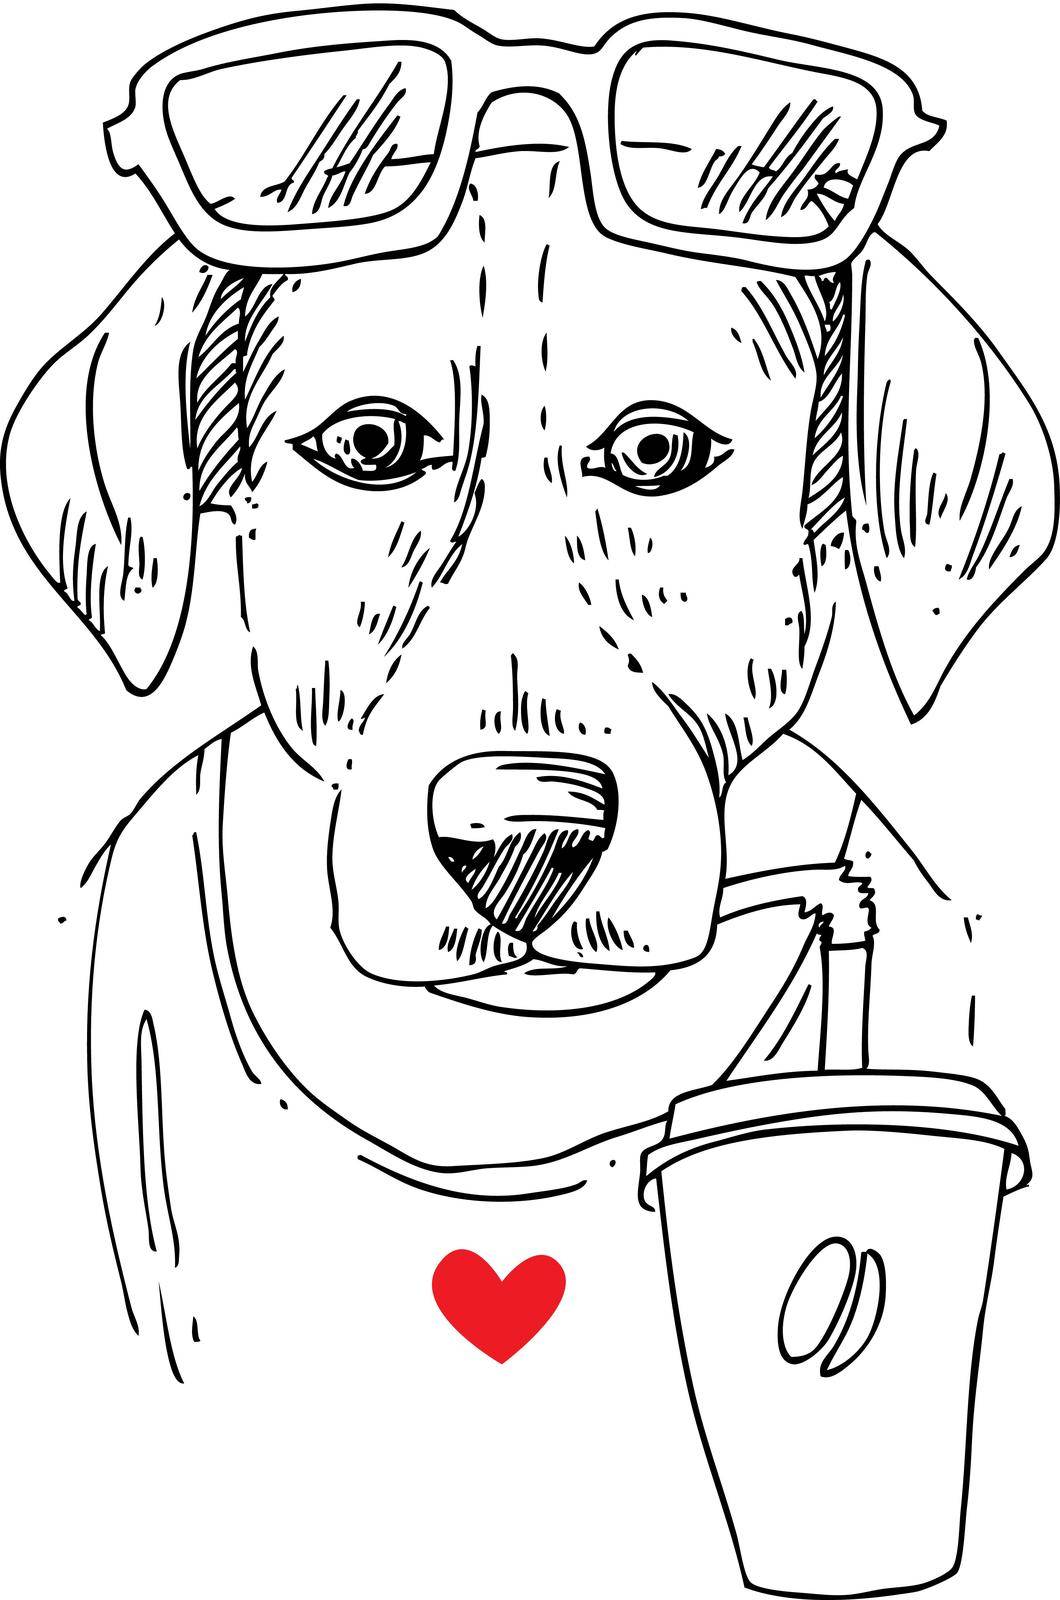 Dog drinks coffee. Hand drawn vector illustration for t-shirt, poster, postcard. Ink drawing.